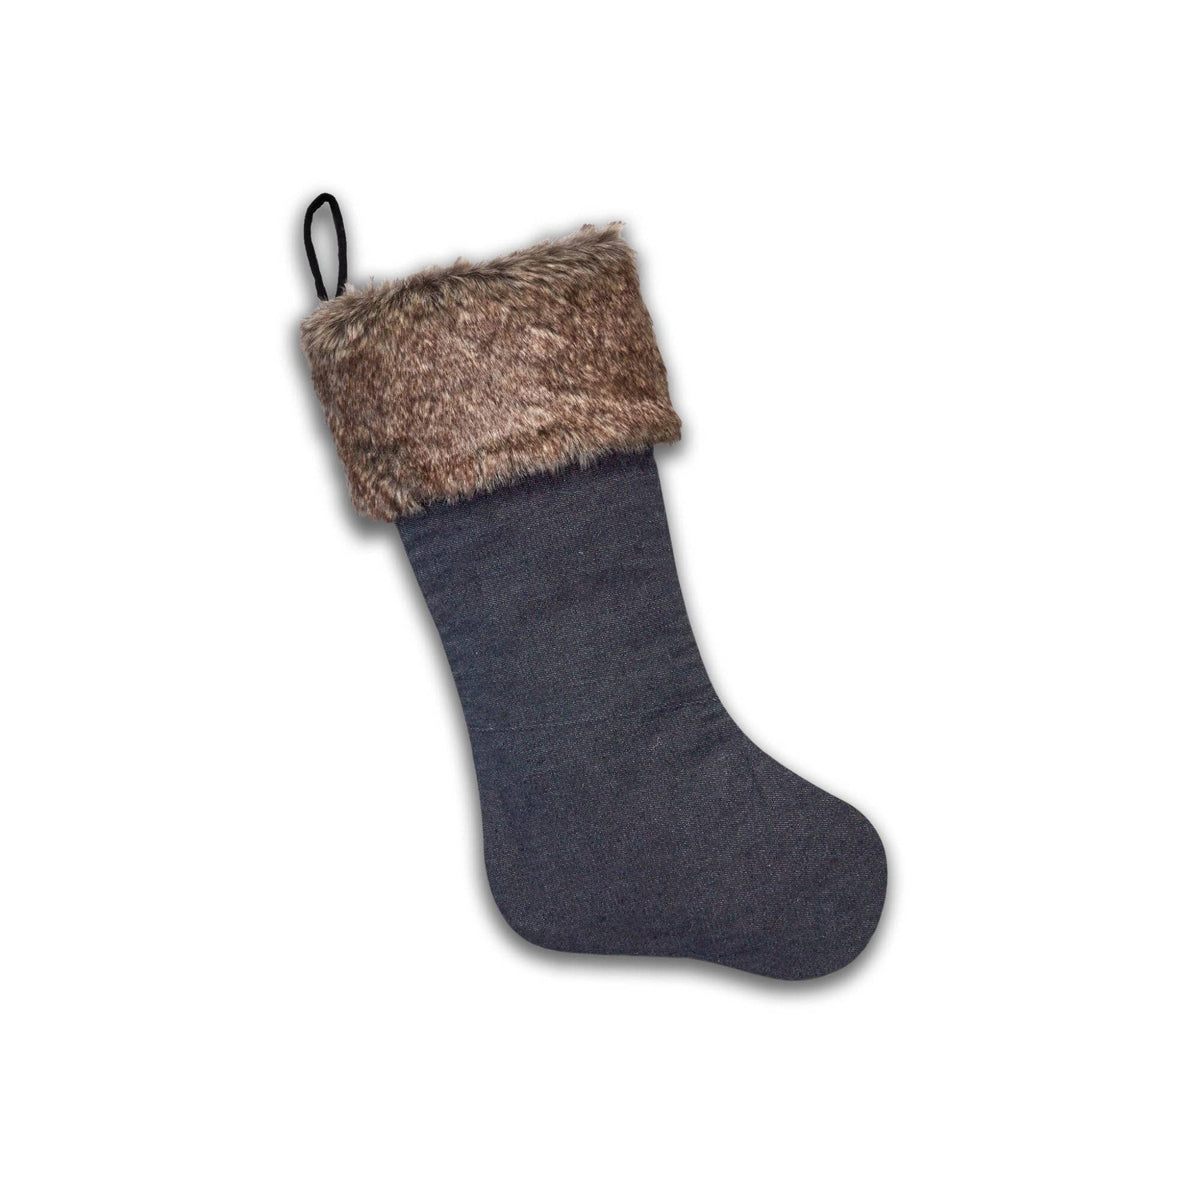 Dress Denim Christmas Stocking with Faux Fur Trim - SLATE Boutique & Gifts